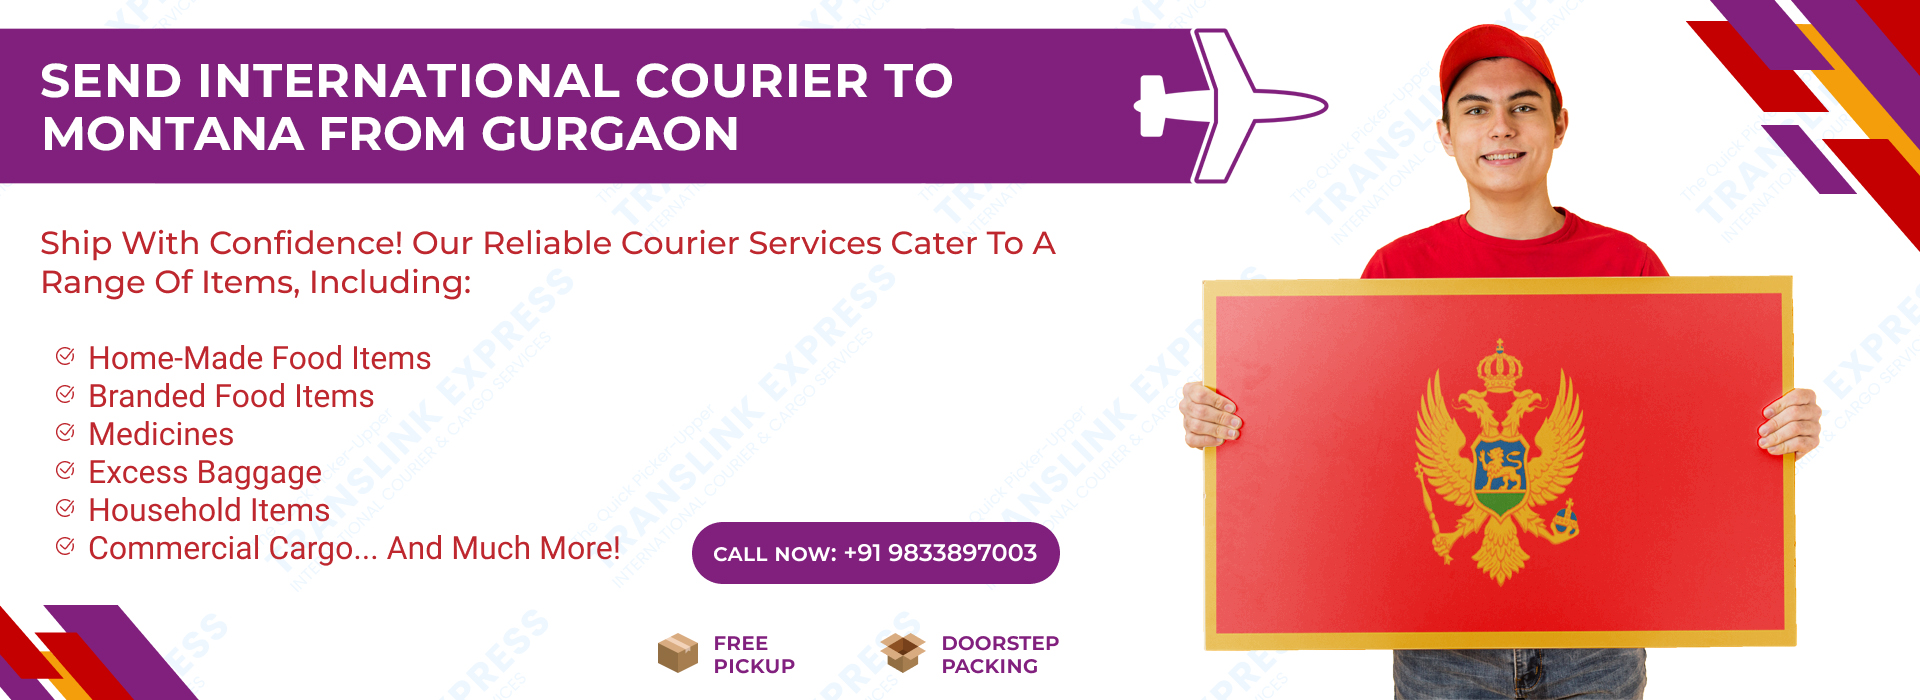 Courier to Montana From Gurgaon